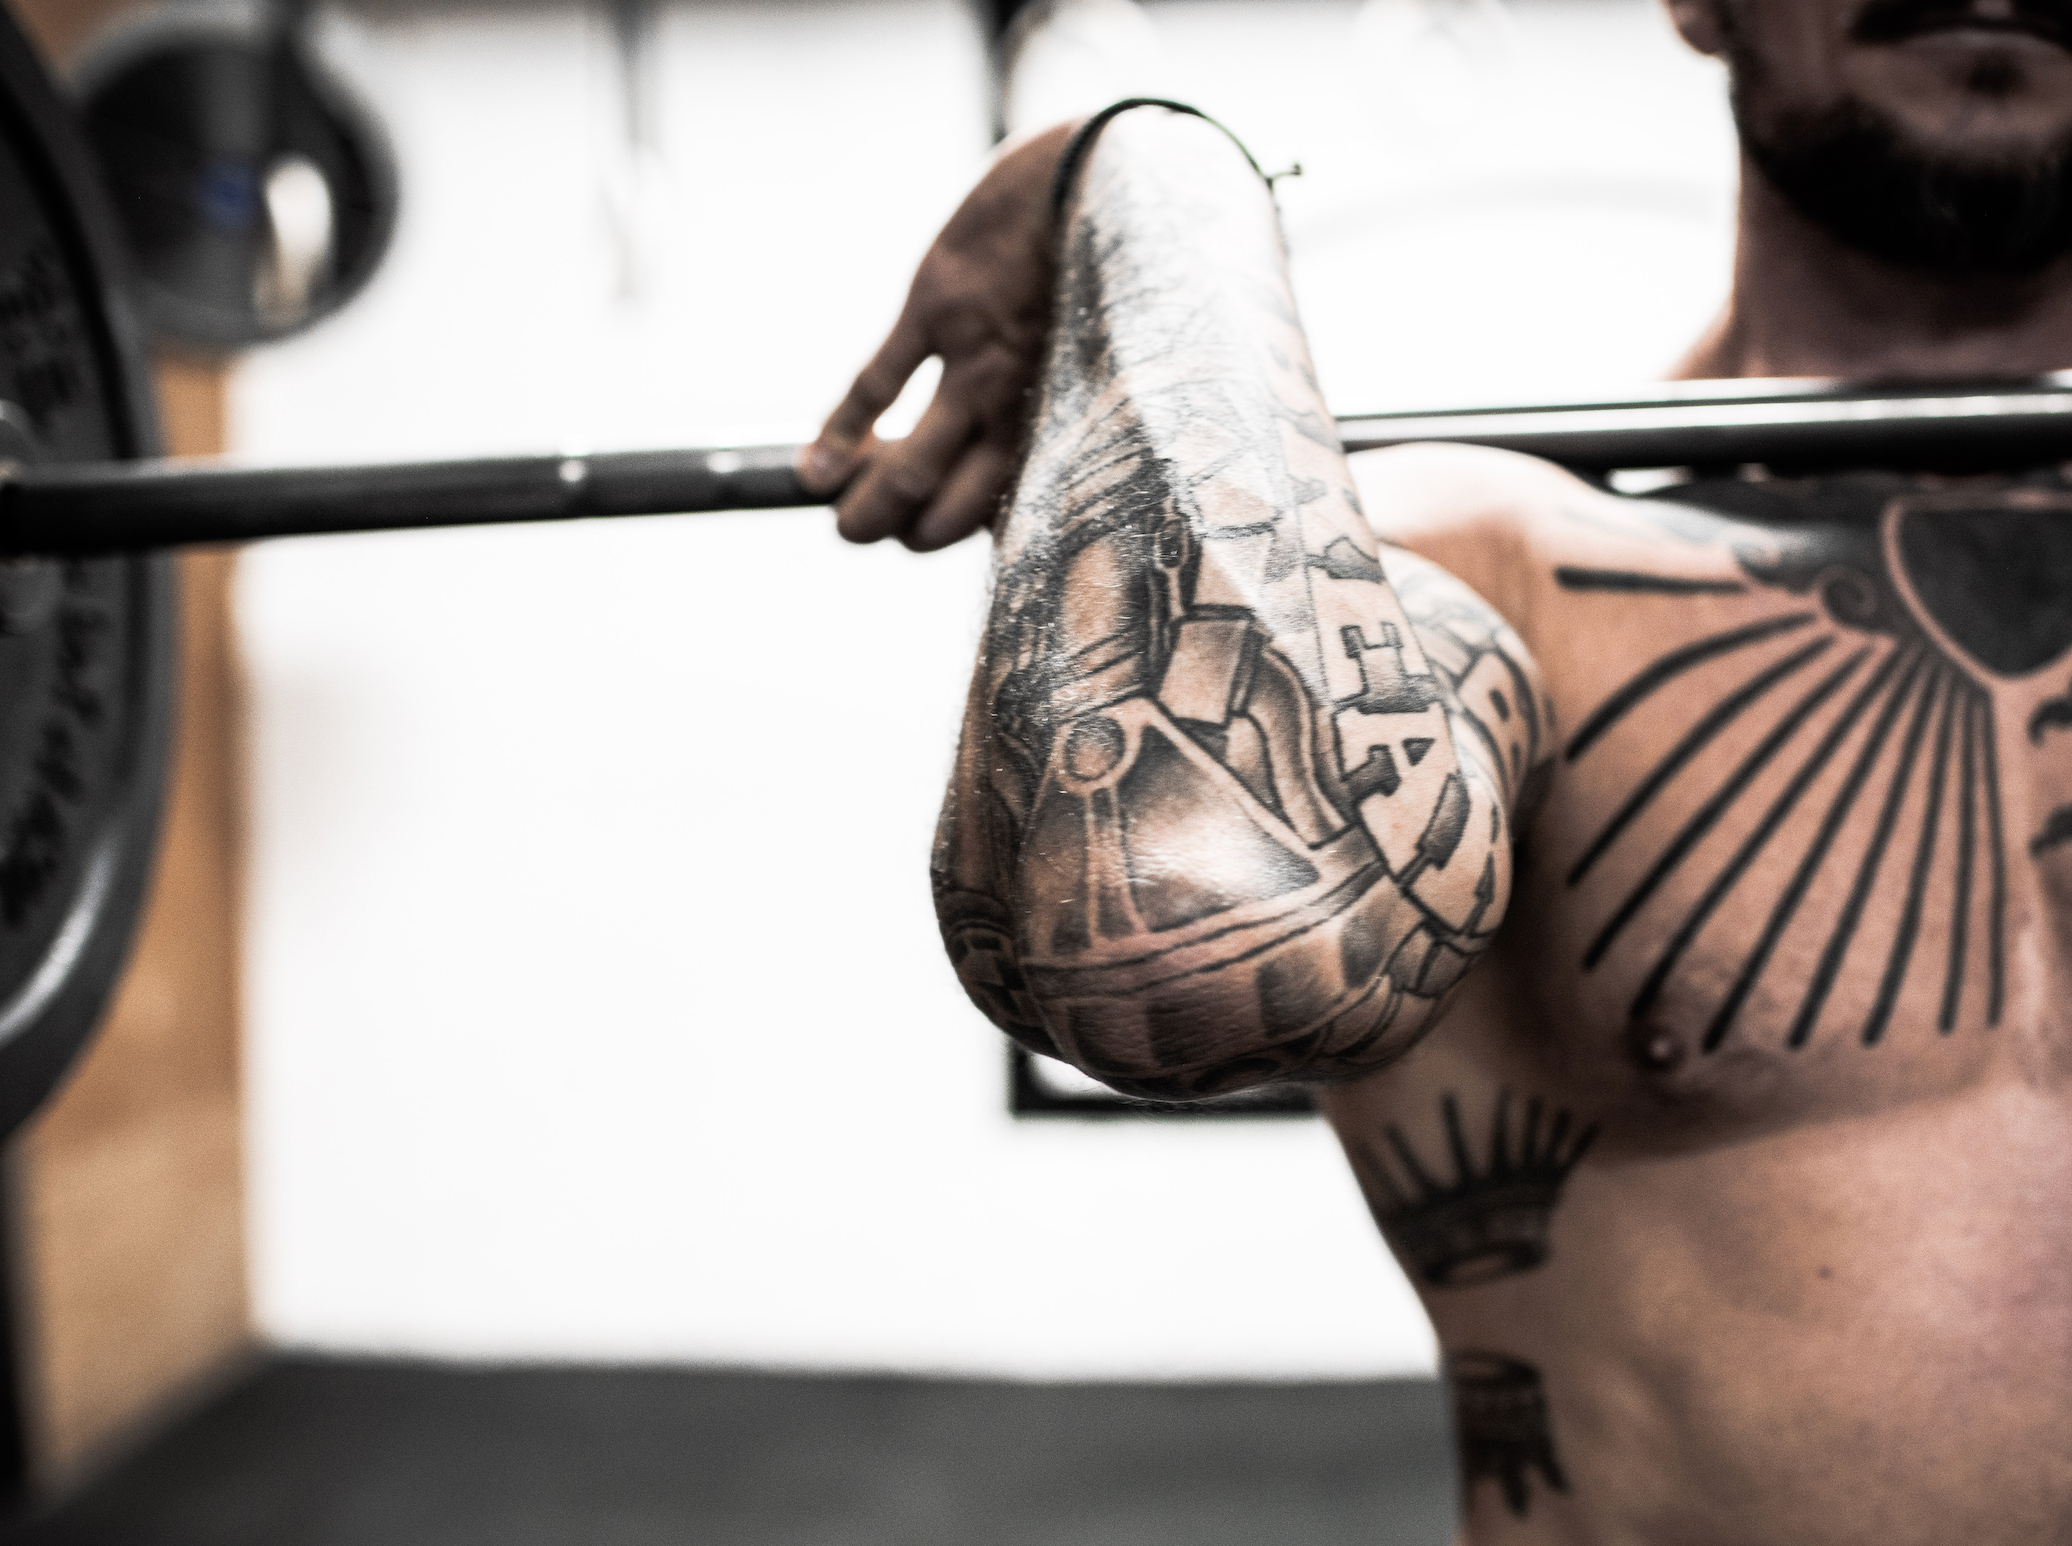 An athlete or CrossFitter lifting weights with the bar curled up on his chest during a workout.